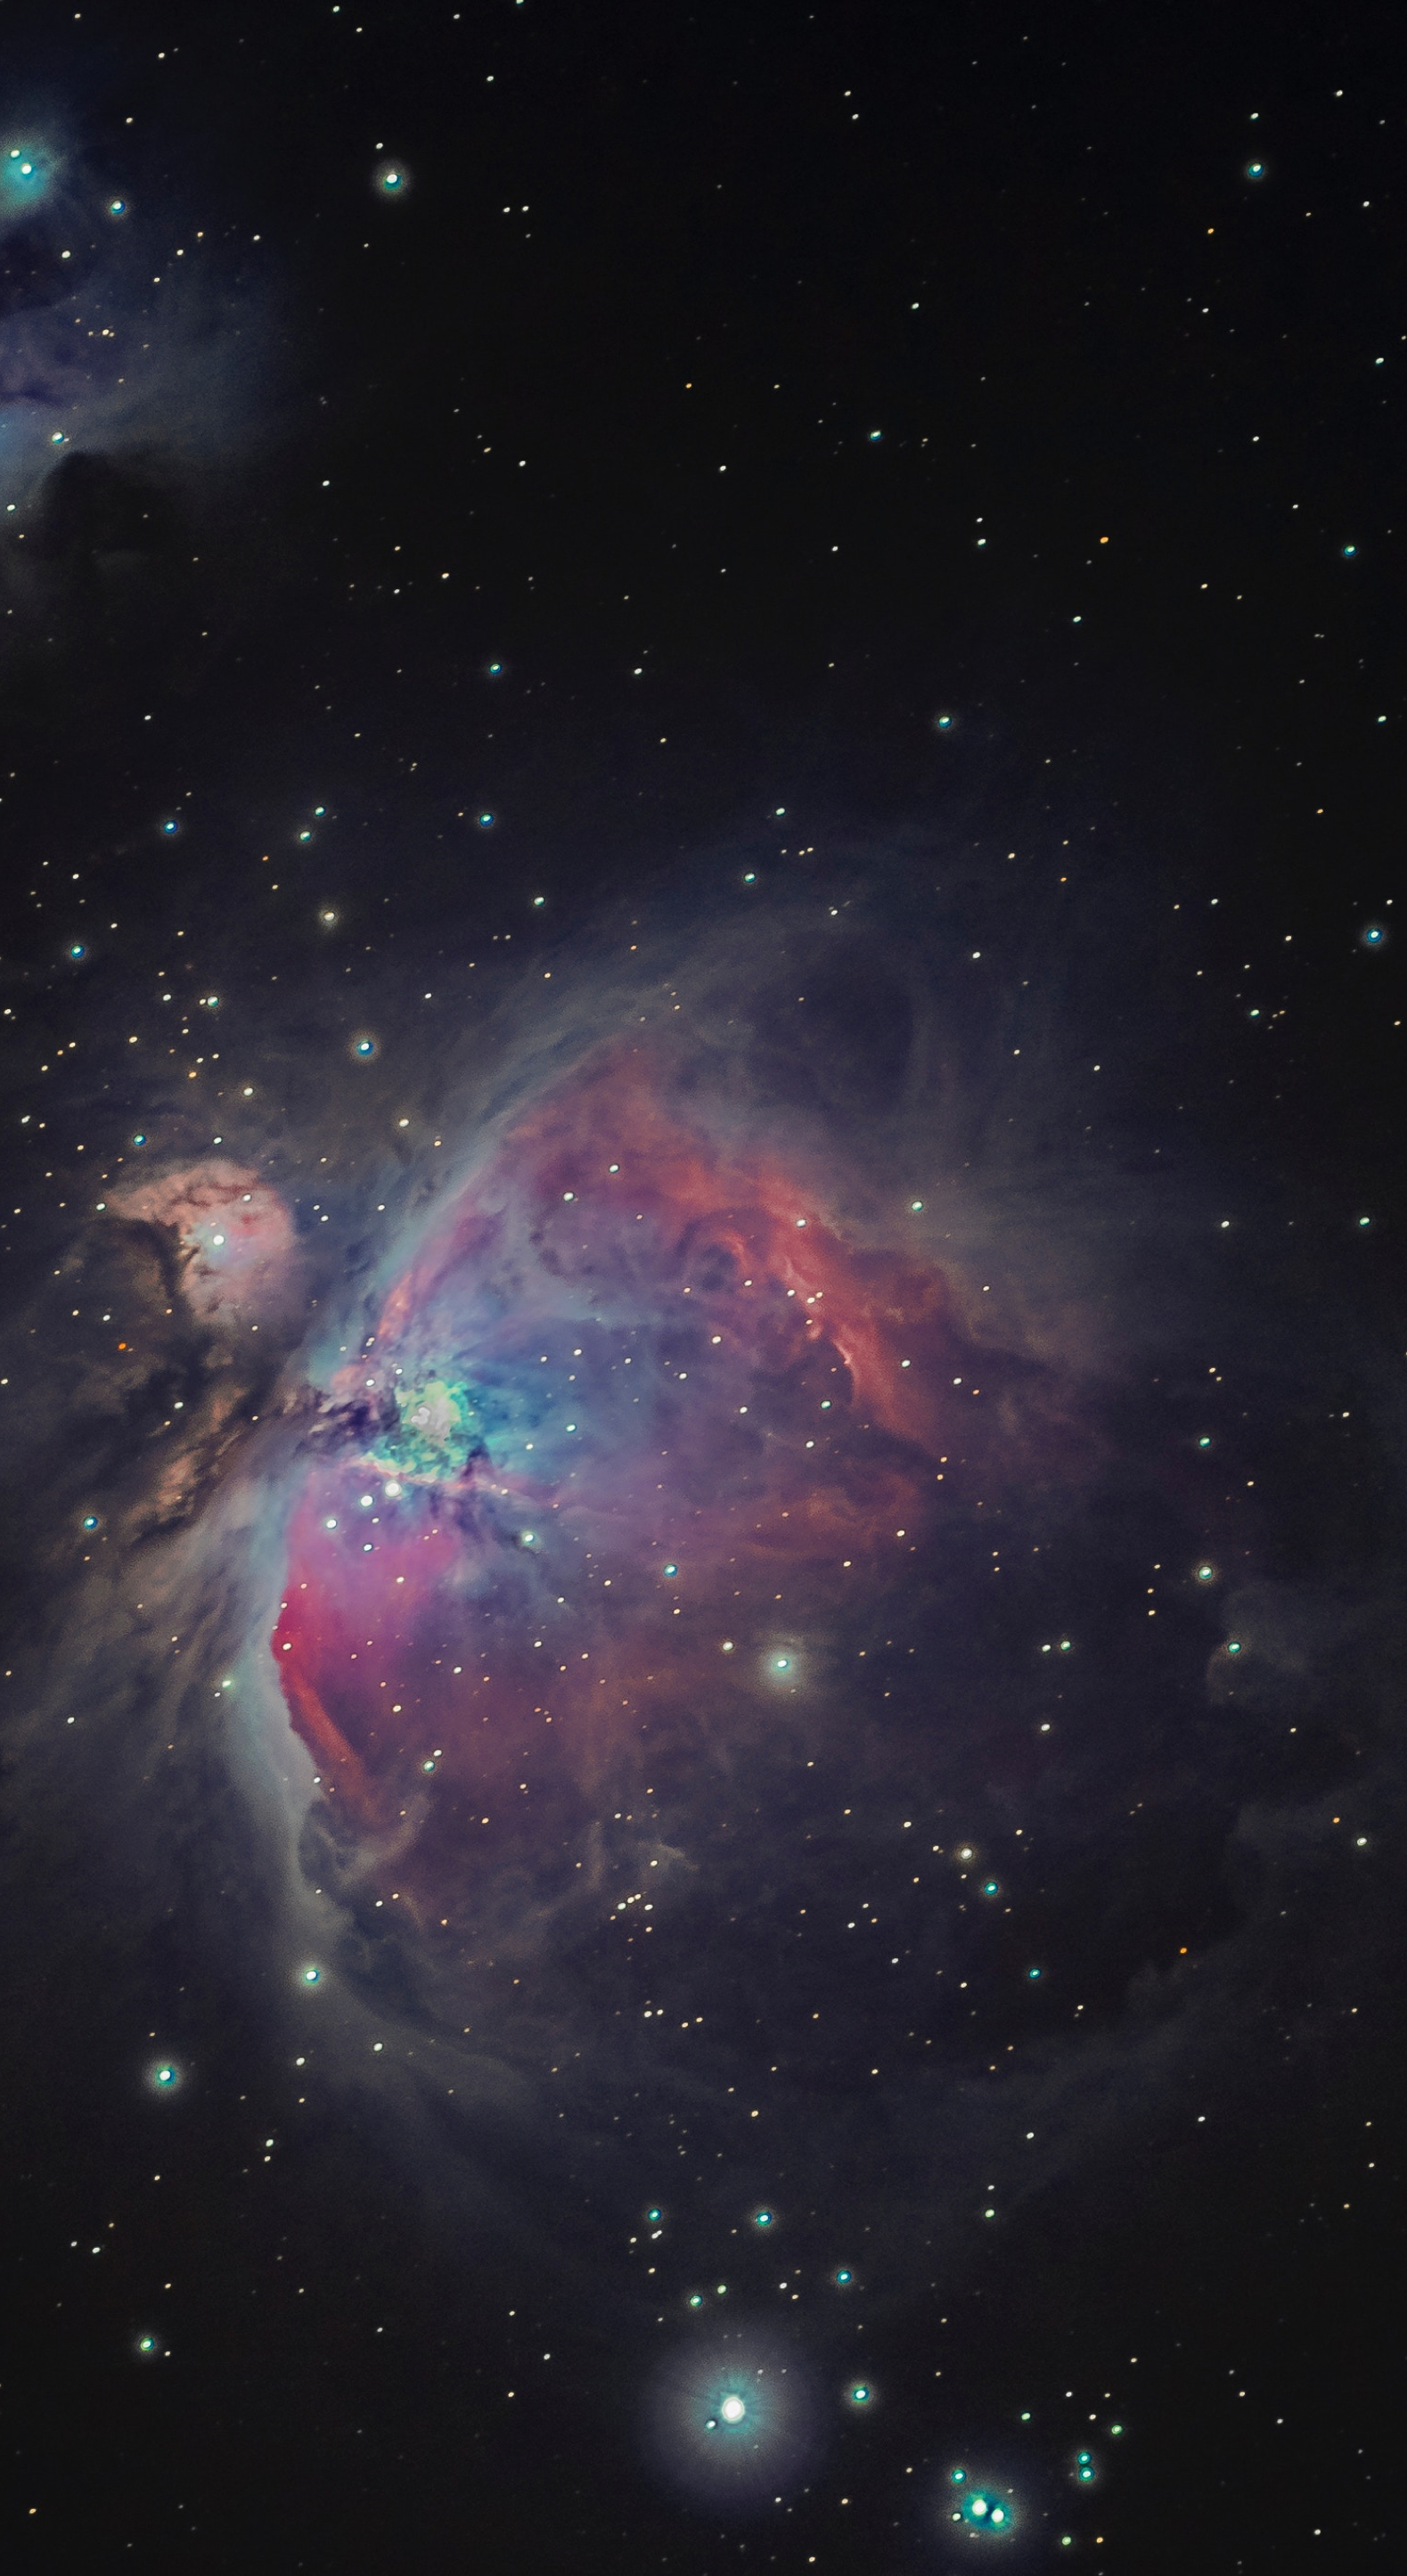 Wallpaper Weekends: Stargazing Orion Nebula for Mac, iPad, iPhone, and Apple Watch